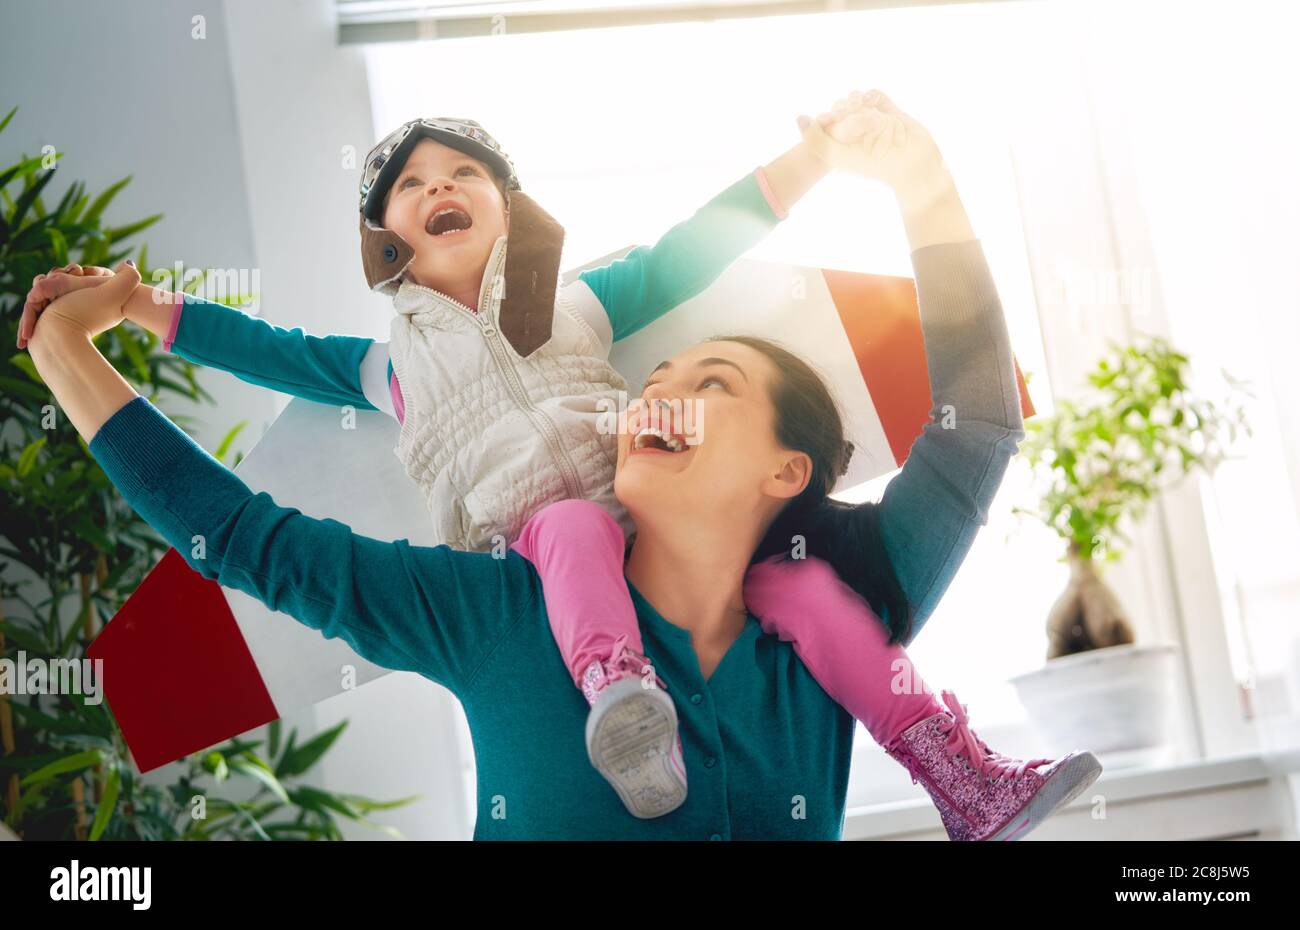 Happy family is having fun at home. Mother and her child girl playing together. Girl in pilot's costume. Stock Photo